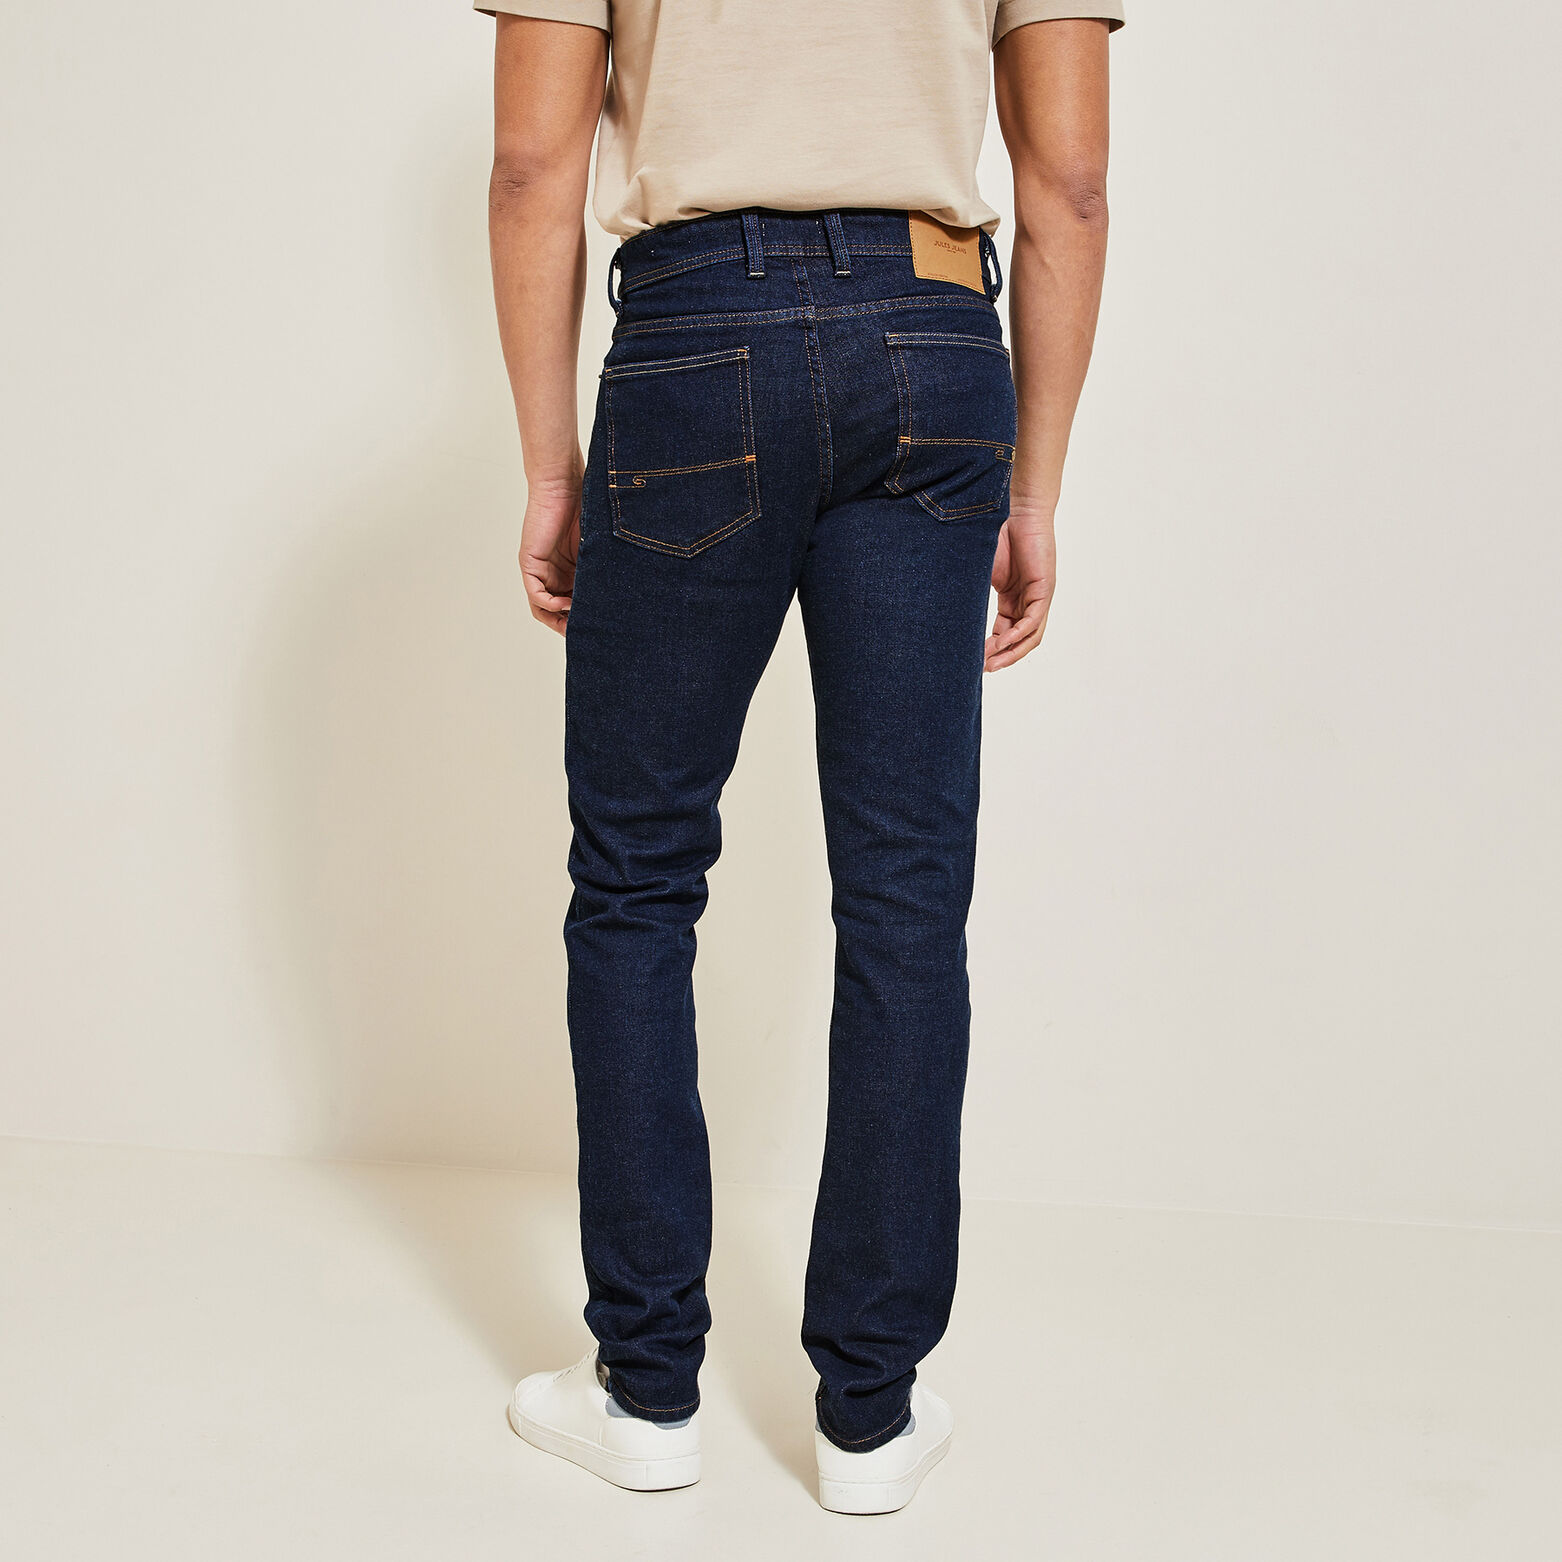 Straight cinq/neuf jeans, 3e editie, Made in Franc